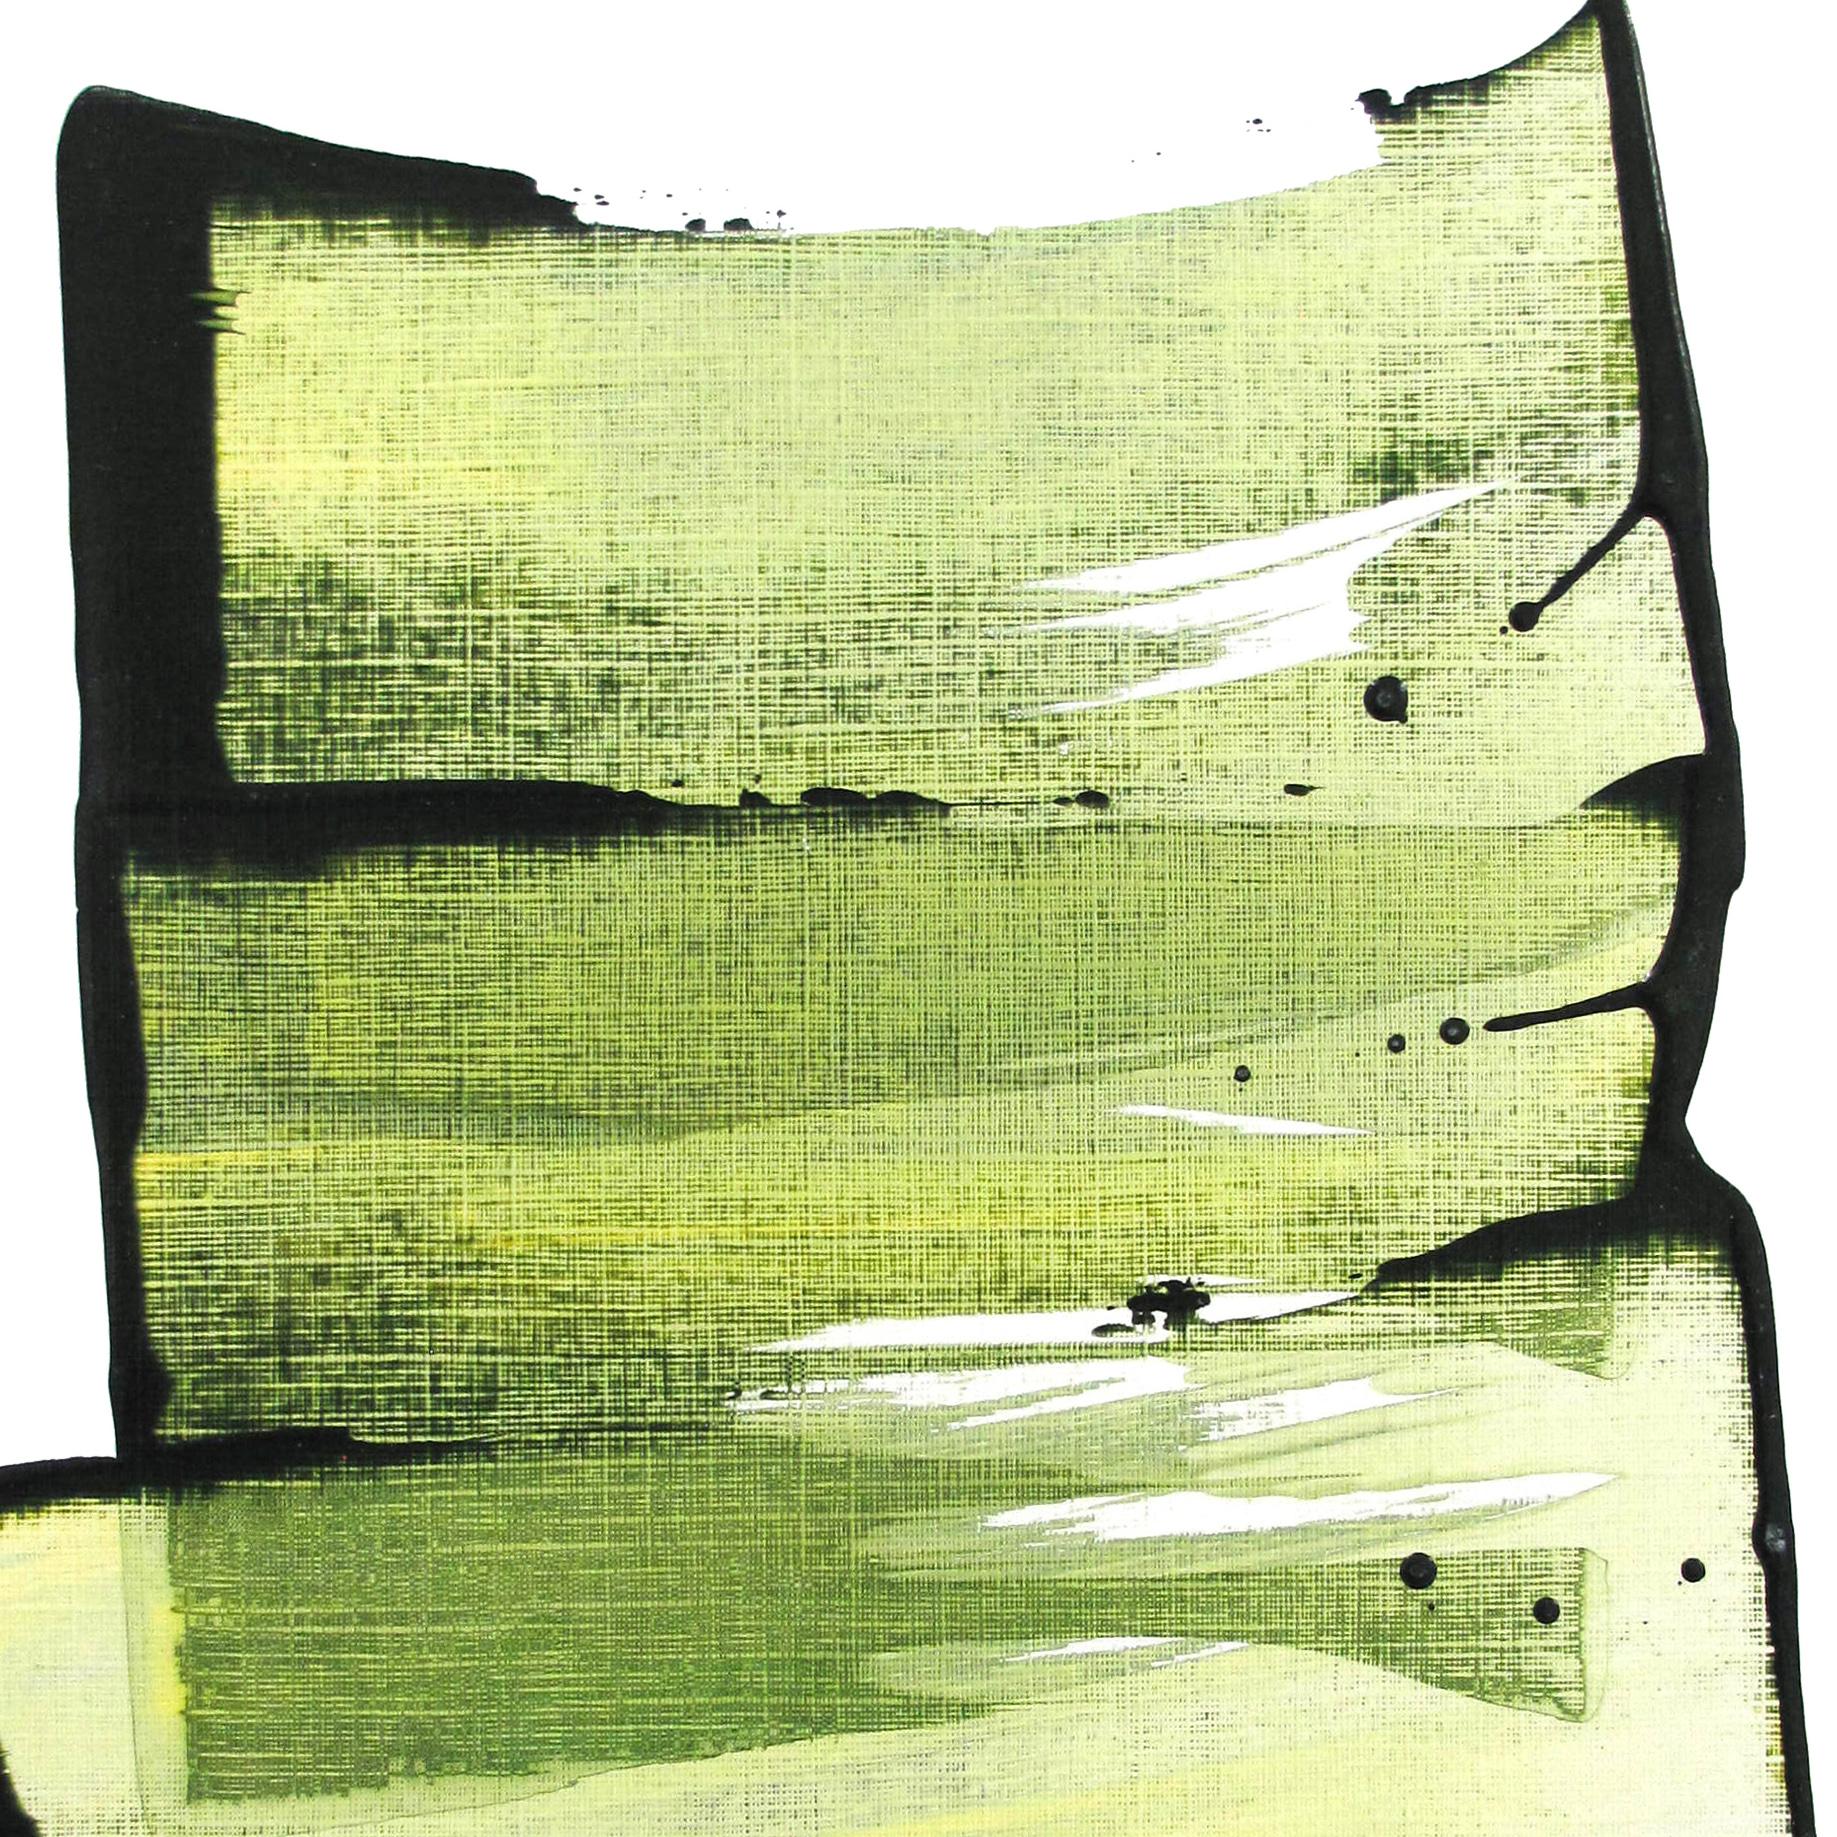 Golden Green 07 (Abstract Painting)

Acrylic on Hahnemühle paper - Unframed

Emma Godebska is a French abstract artist living in Nimes, France.
Her use of natural pigments, reflective of nature itself, is in dialogue with diluted acrylic paint and